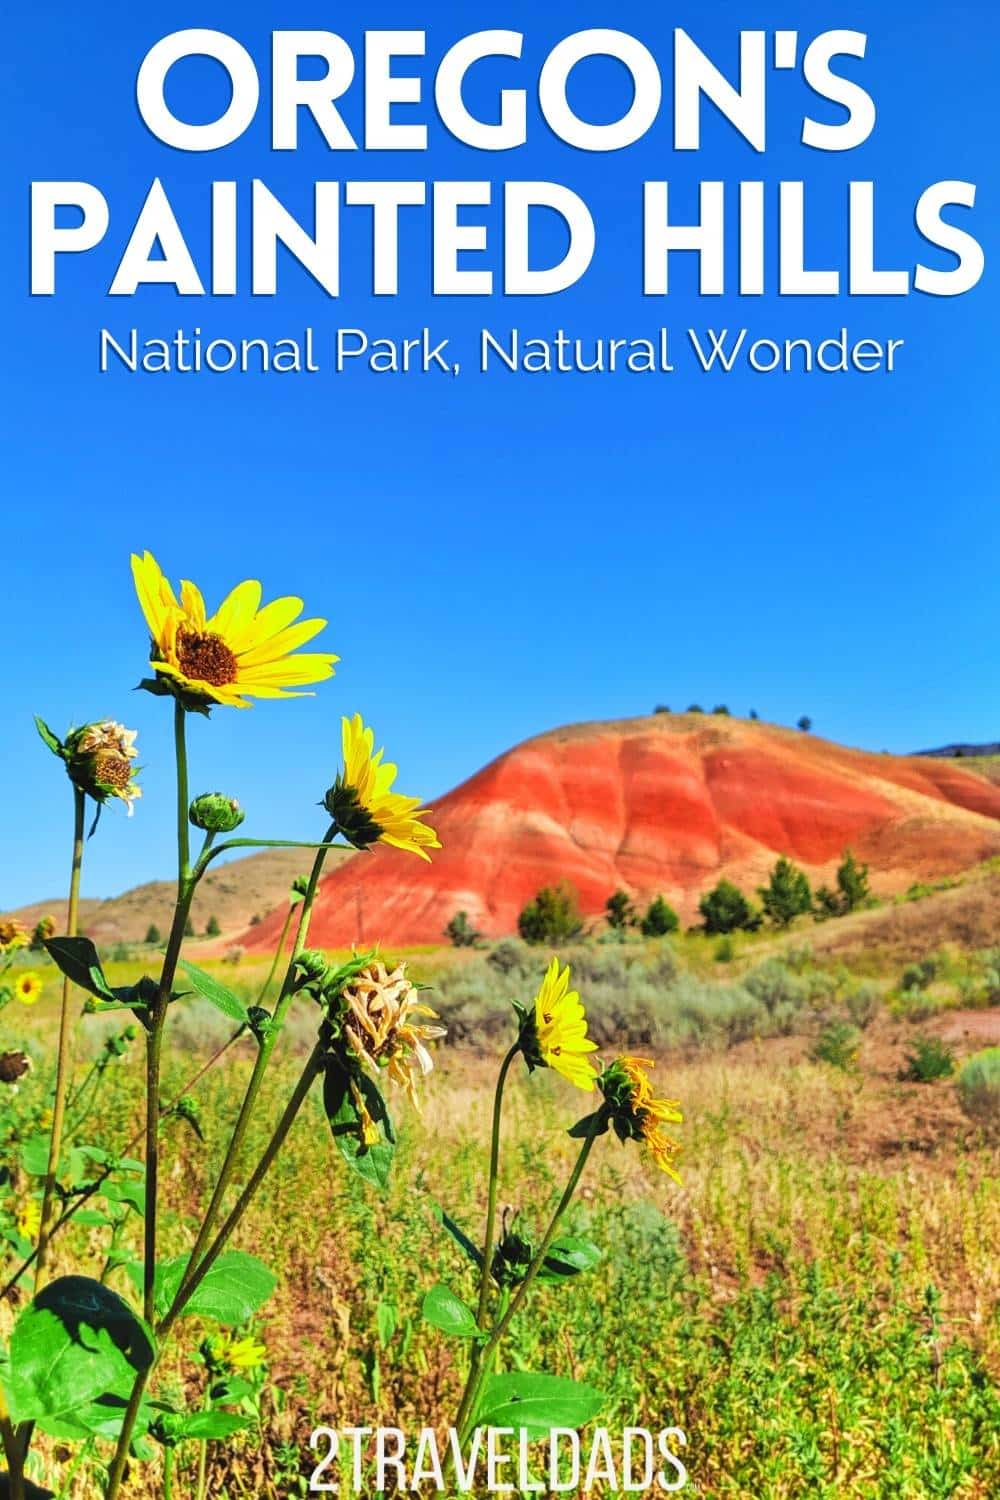 Oregon's Painted Hills are a unique natural wonder. See how to get there, when to visit, where to stay, and hiking trails at John Day Fossil Beds National Monument. Most incredible National Park in Oregon.